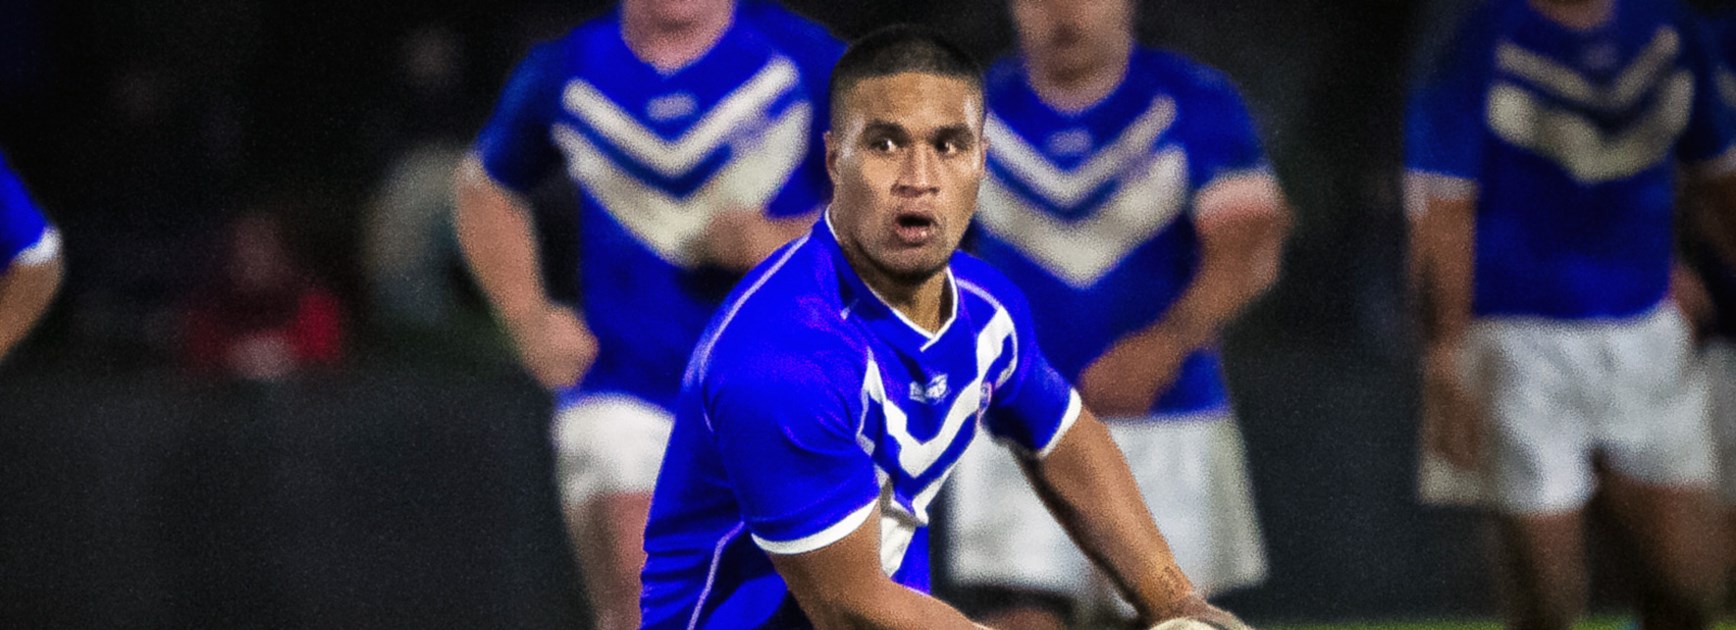 Raymond Talimalie may get another shot at the NRL after being named Auckland Rugby League's Player of the Year.